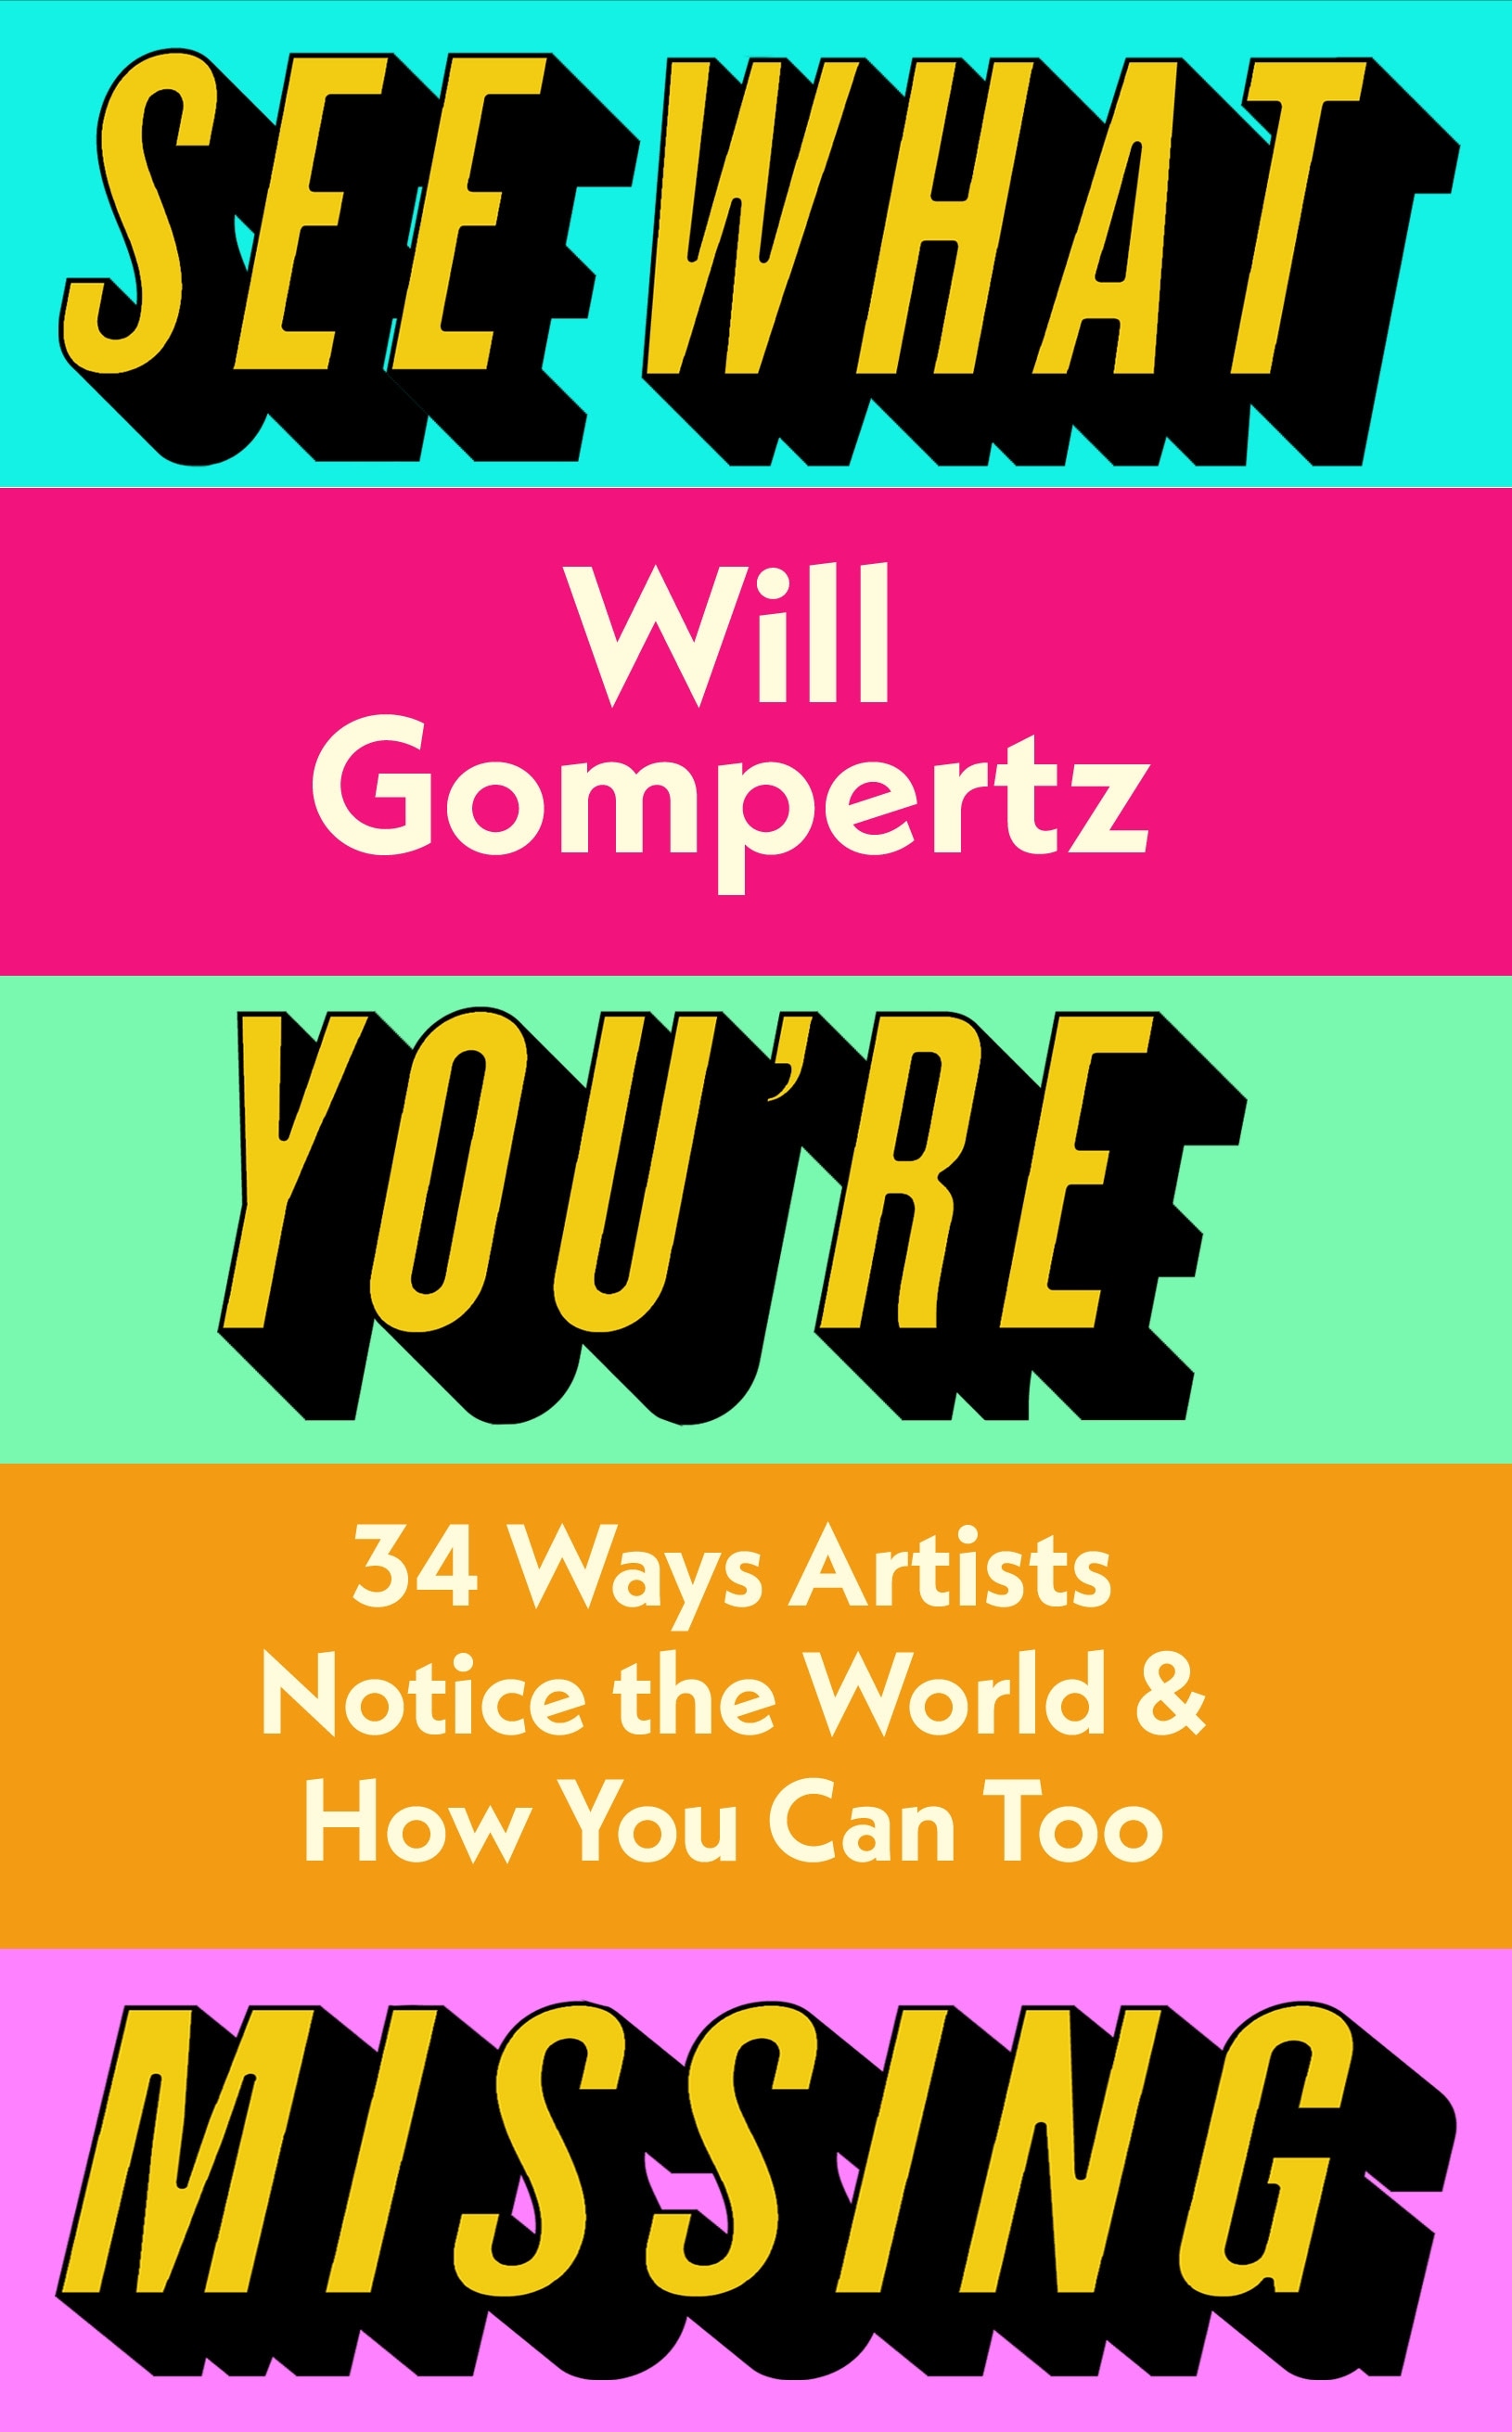 Book “See What You're Missing” by Will Gompertz — June 30, 2022